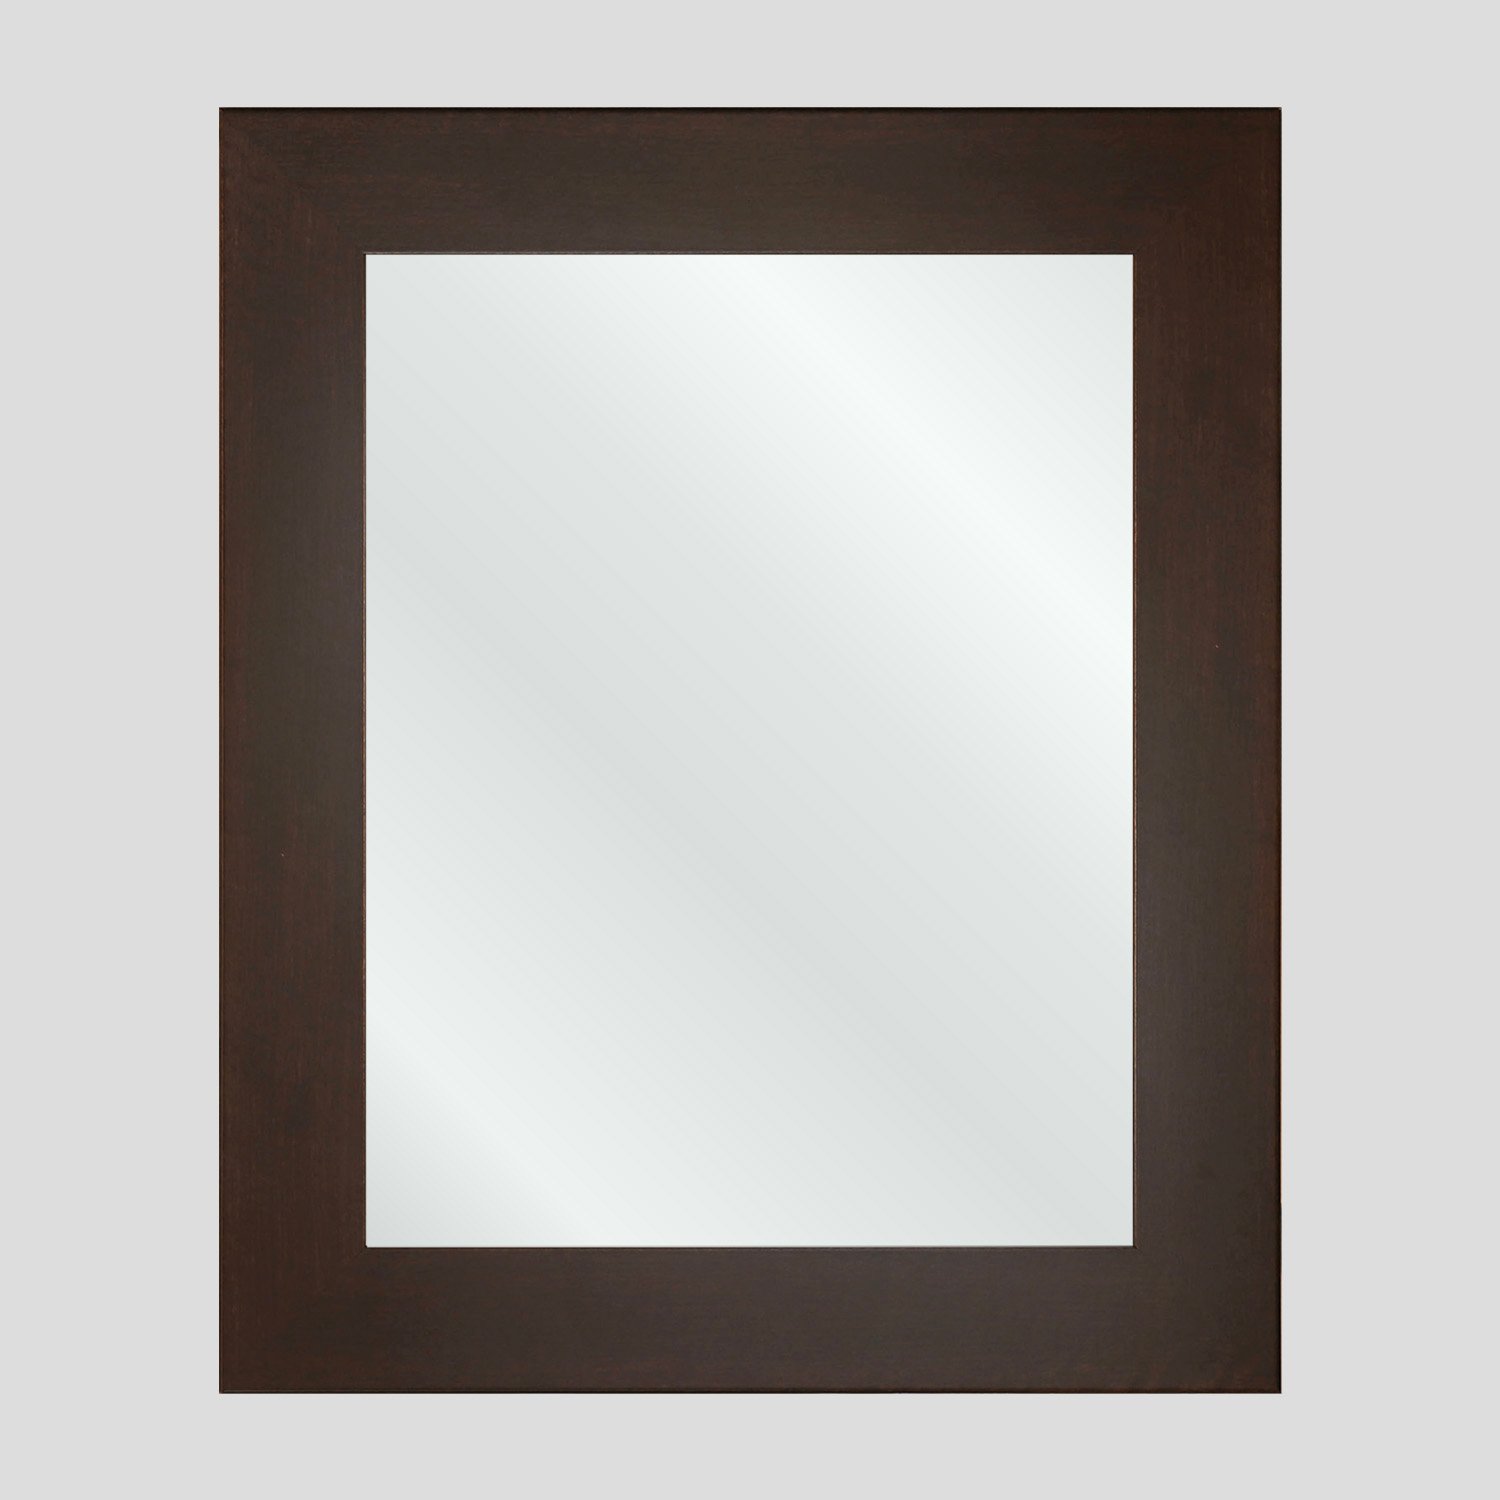 Bronze Storm Framed Mirror, Made to Order for your Bathroom